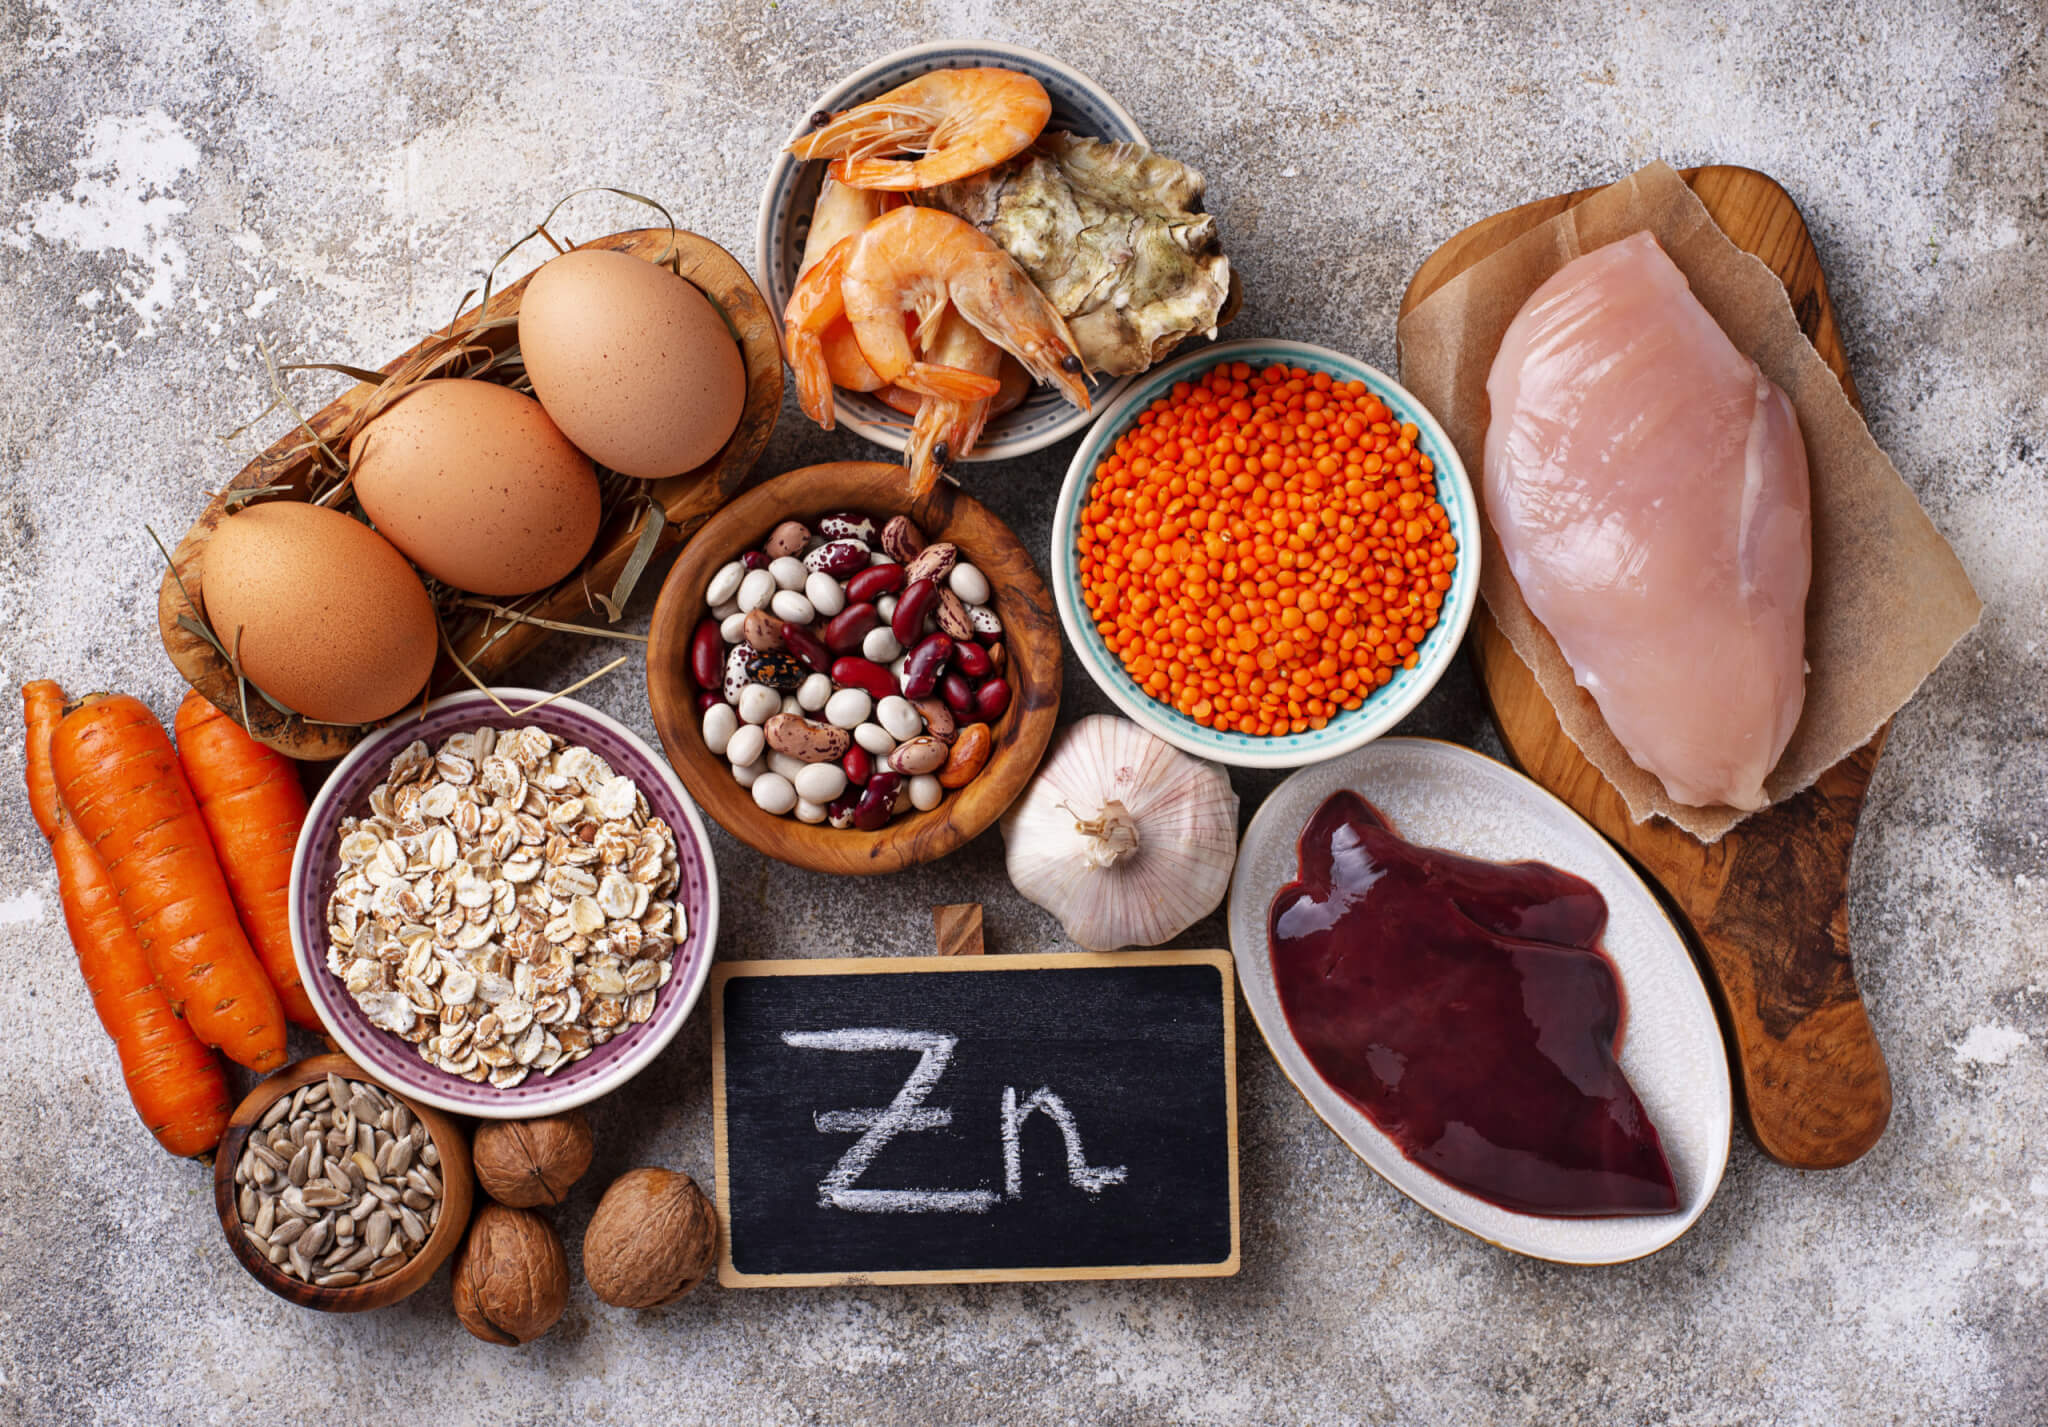 Foods with high levels of Zinc